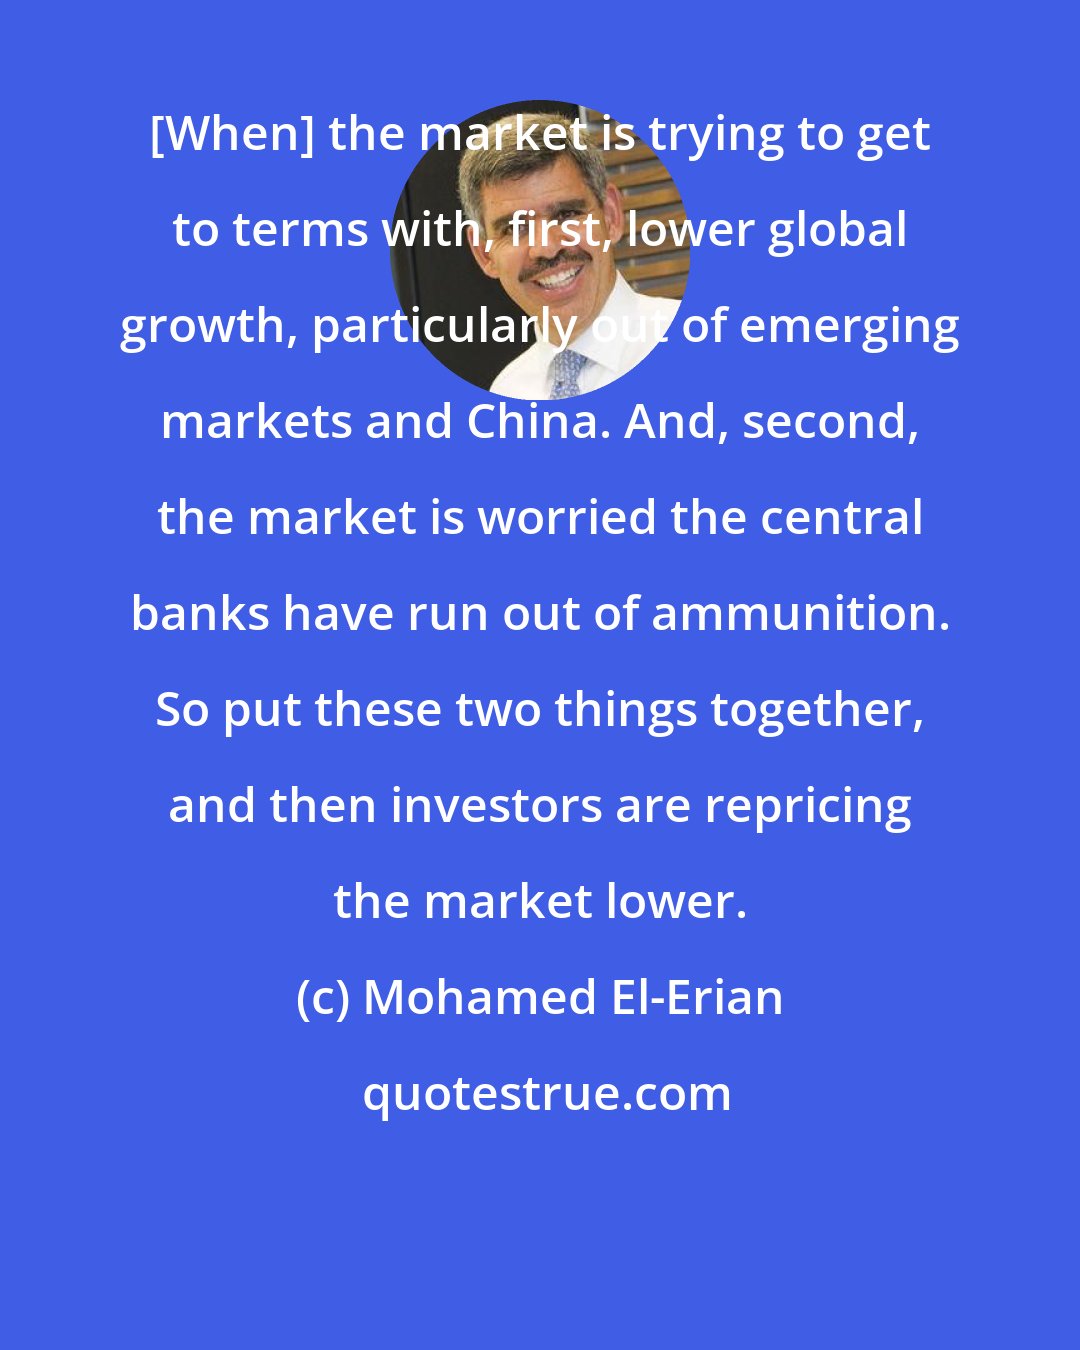 Mohamed El-Erian: [When] the market is trying to get to terms with, first, lower global growth, particularly out of emerging markets and China. And, second, the market is worried the central banks have run out of ammunition. So put these two things together, and then investors are repricing the market lower.